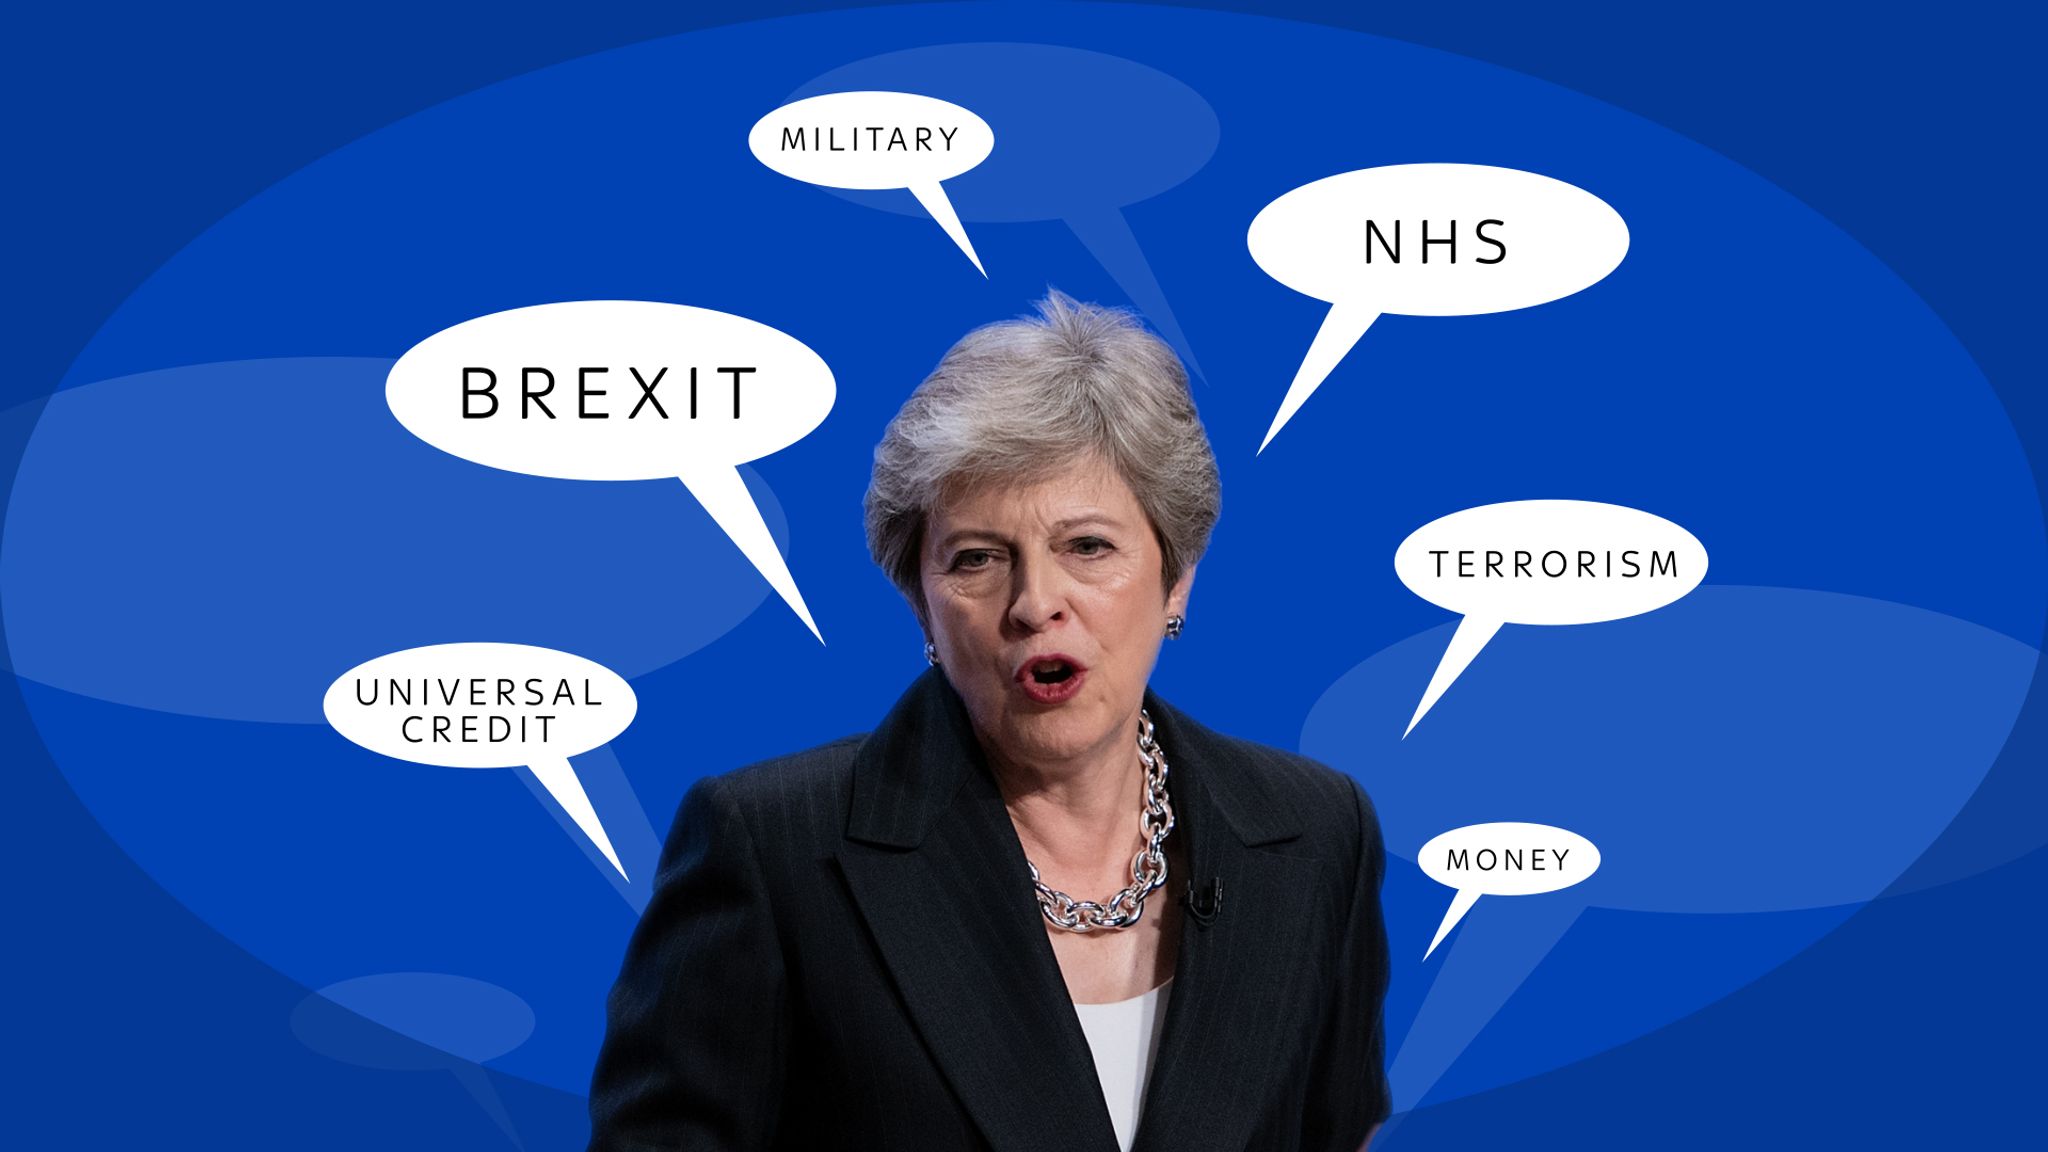 Revealed What Theresa May Talked About Most In Pmqs Politics News Sky News 4780